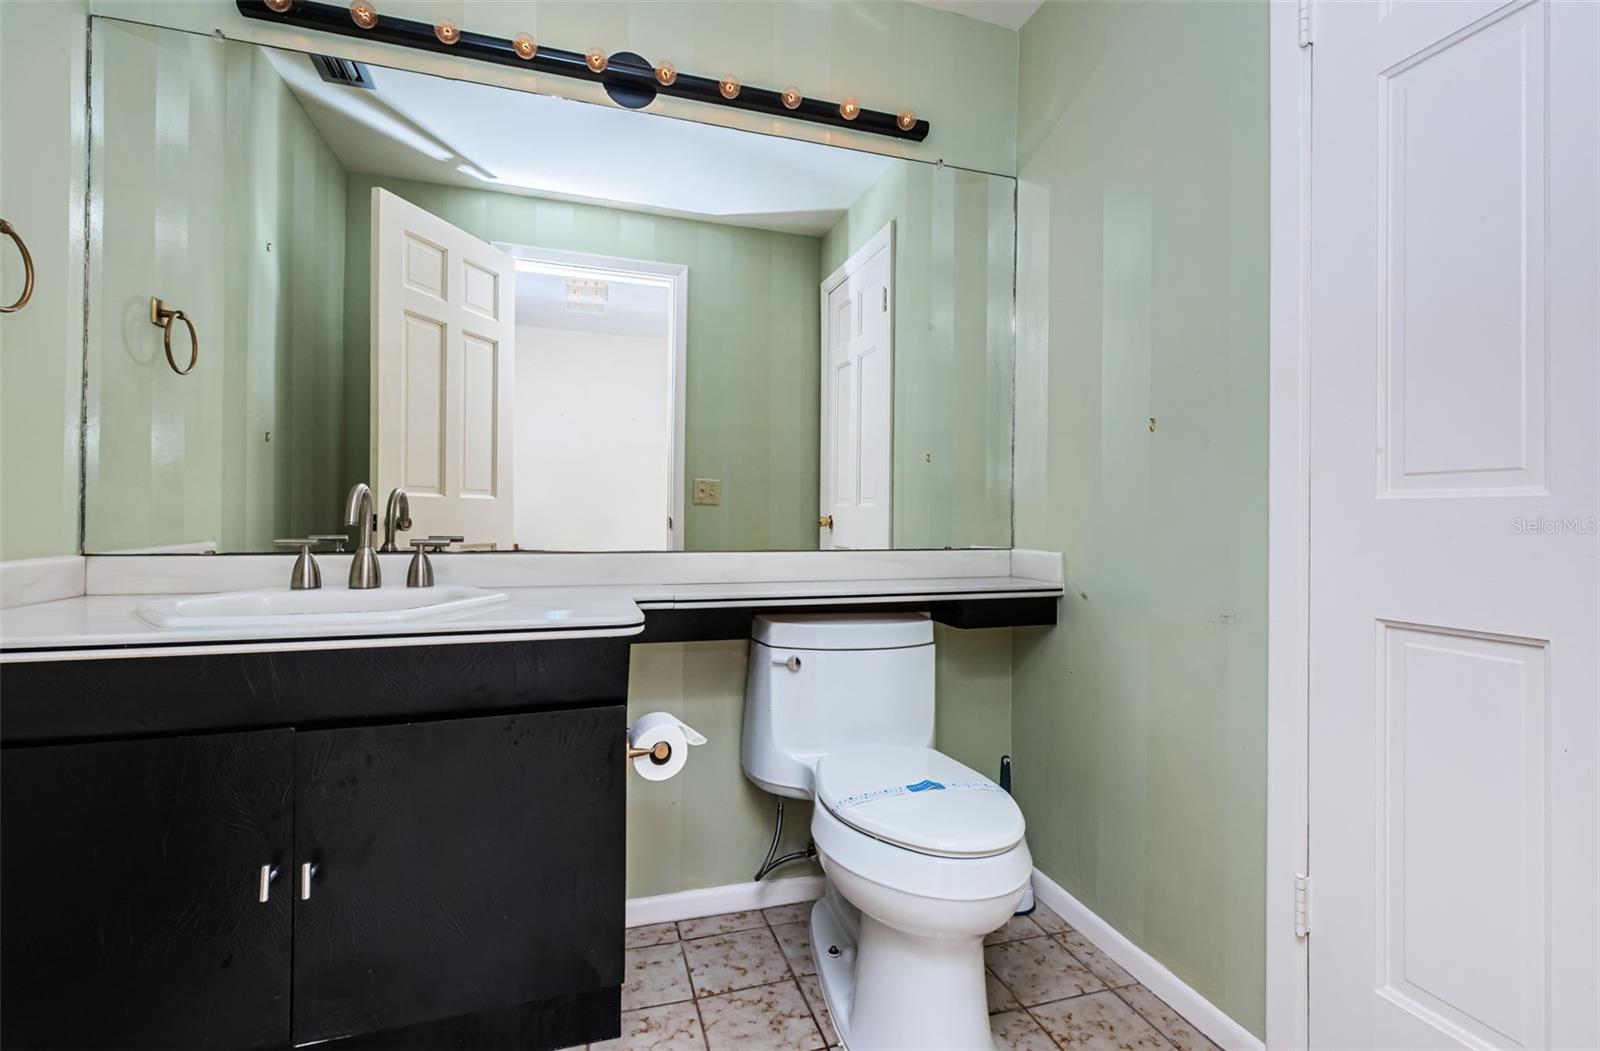 Experience the convenience of this thoughtfully crafted powder room, making it a delightful addition to the charm of this home.